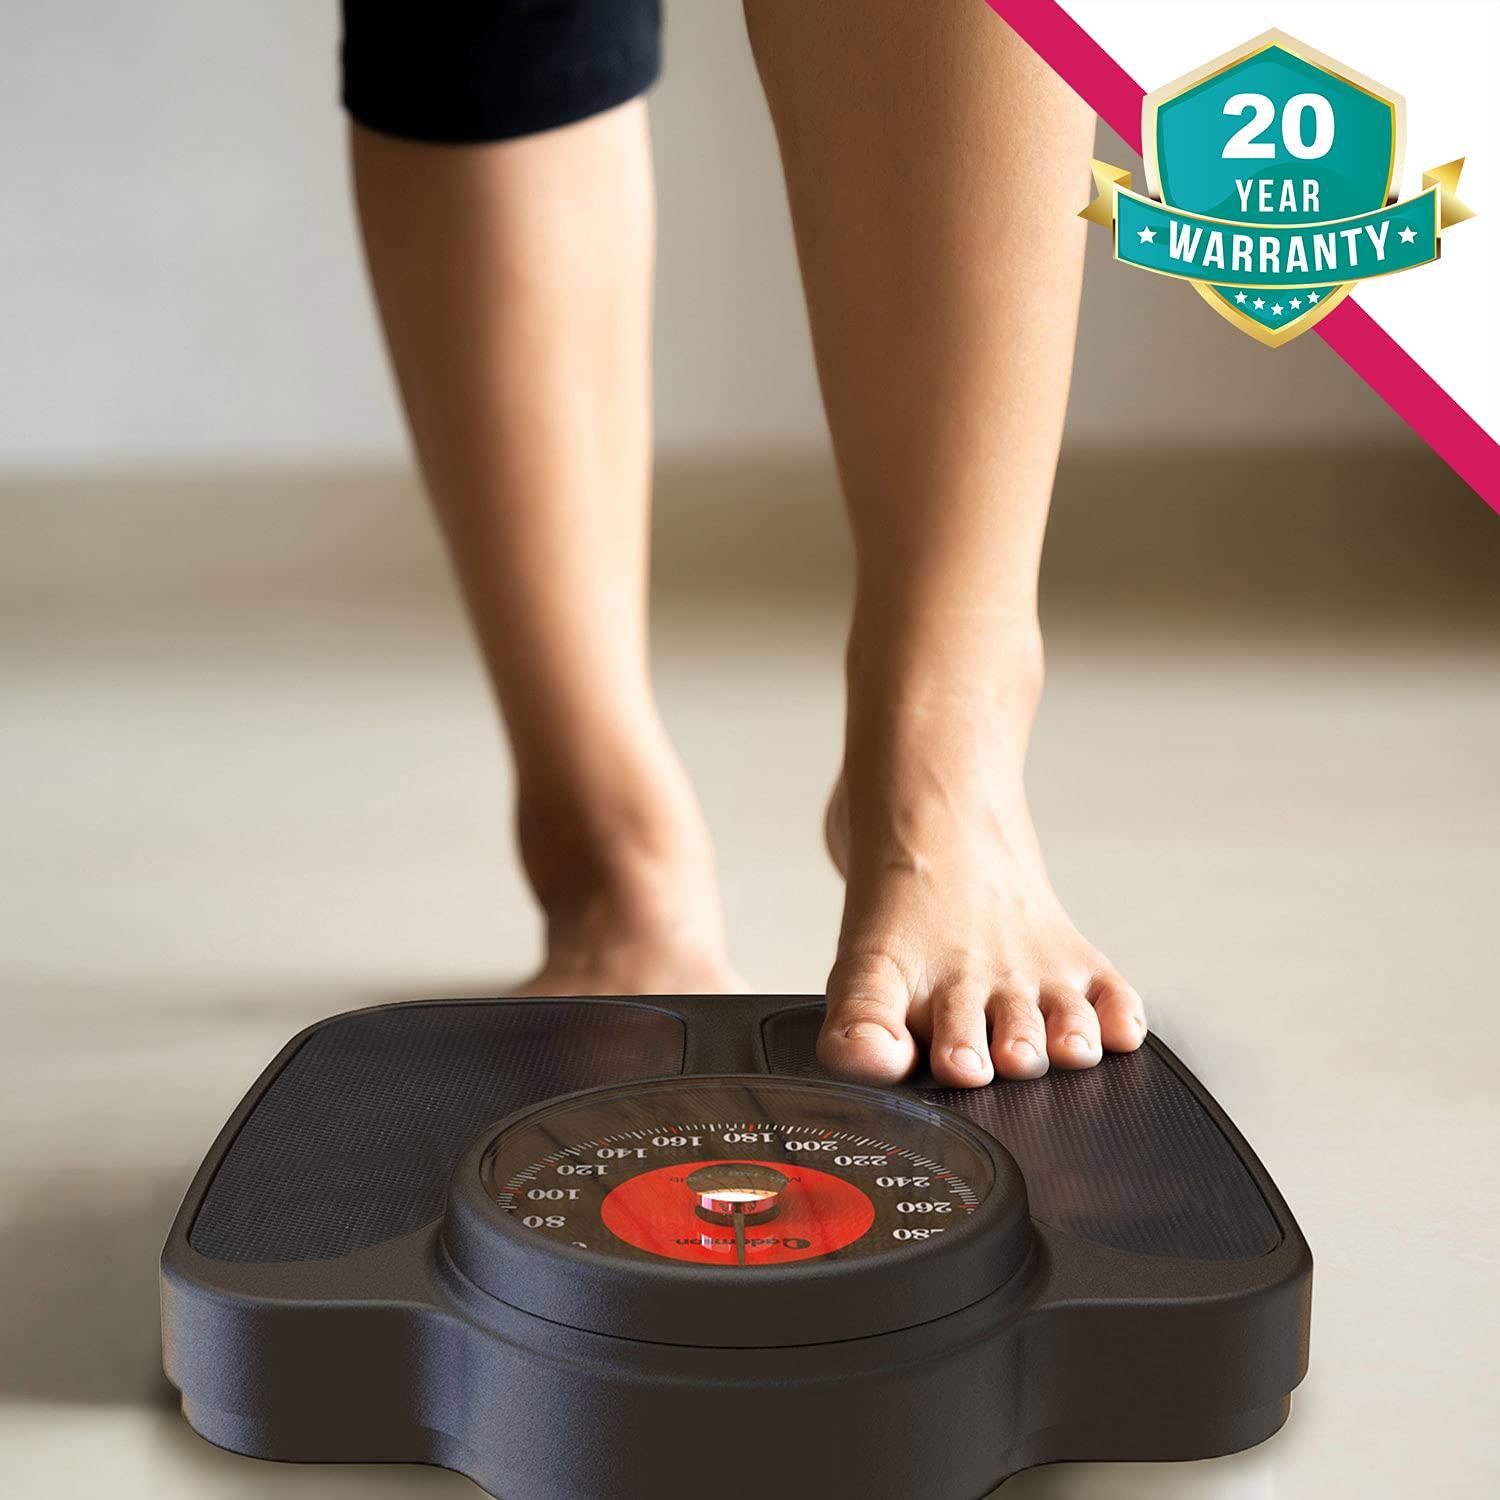 Adamson A27 Scales for Body Weight - Up to 350 lb, Anti-Skid Rubber  Surface, Extra Large Numbers - High Precision Bathroom Scale Analog -  Durable with 20-Year Warranty - New 2022